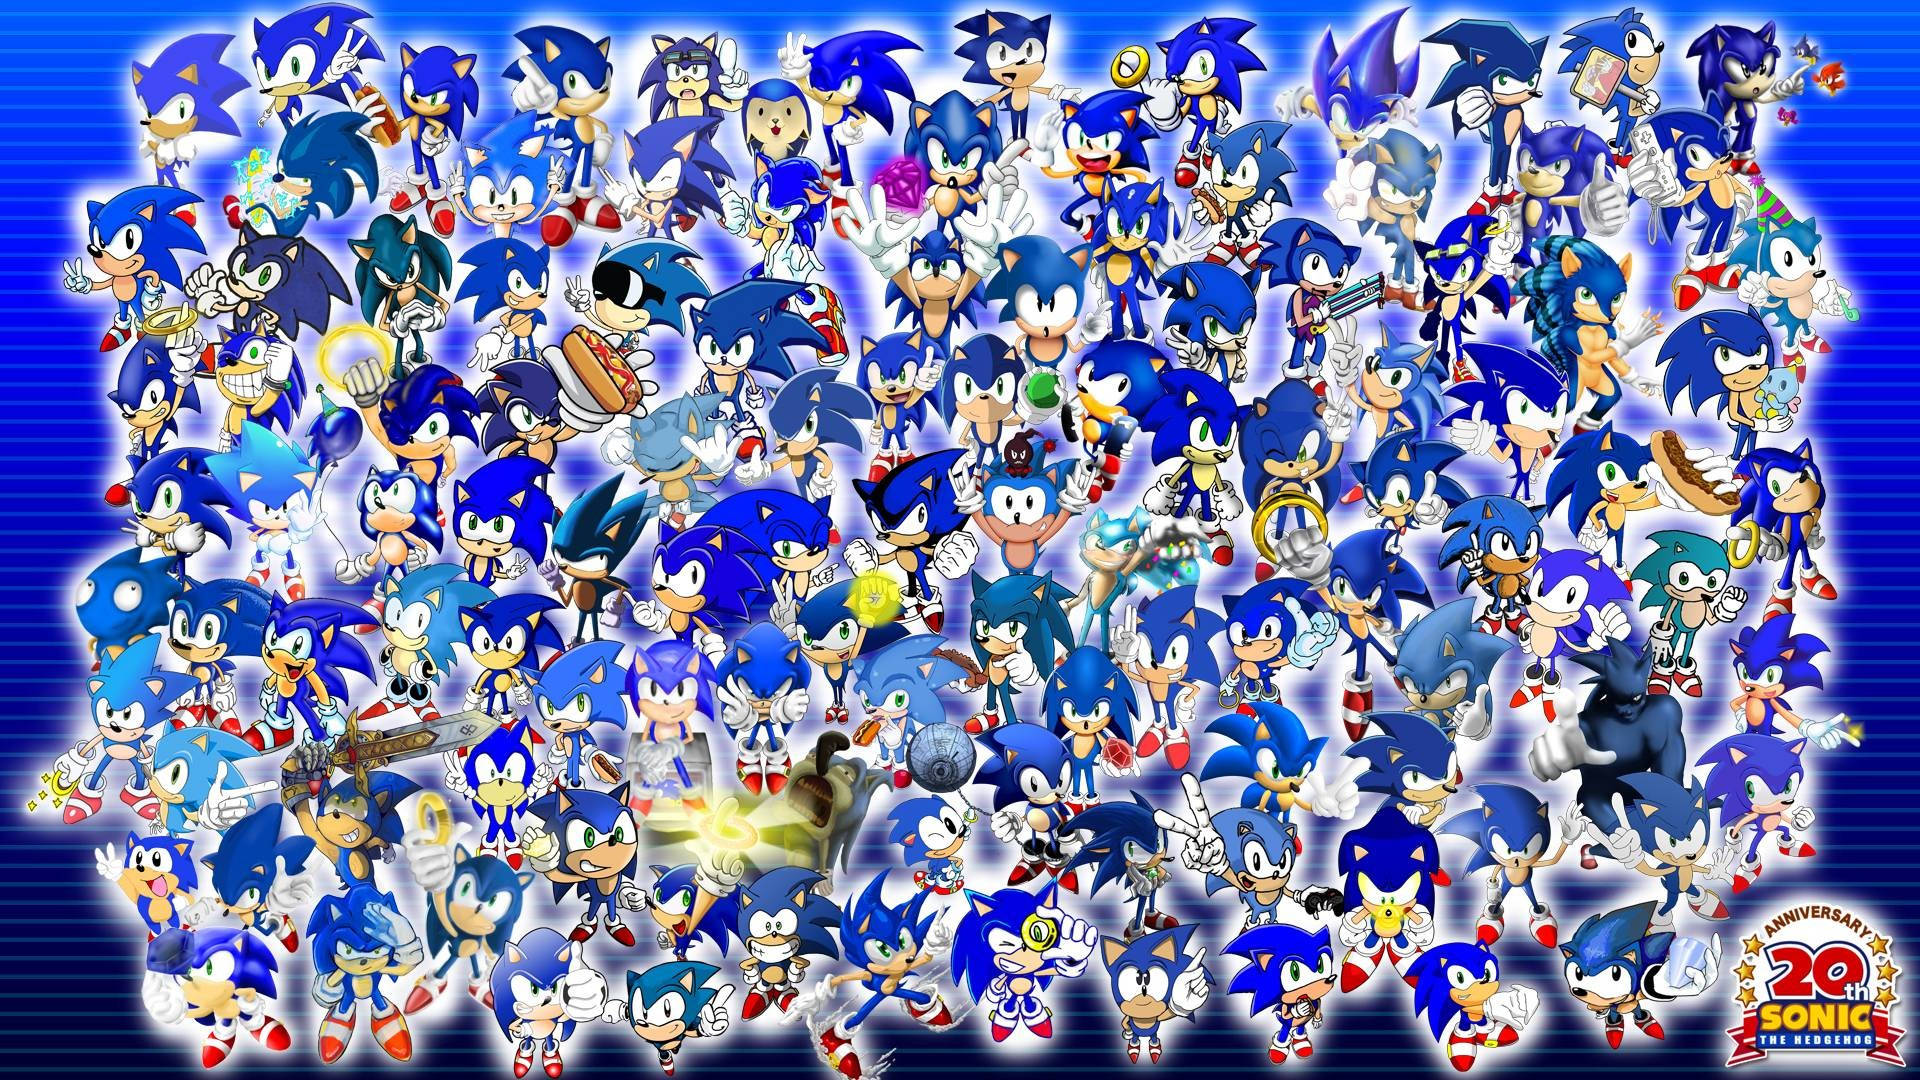 Cool Sonic, the iconic character from the Sonic the Hedgehog video game series Wallpaper